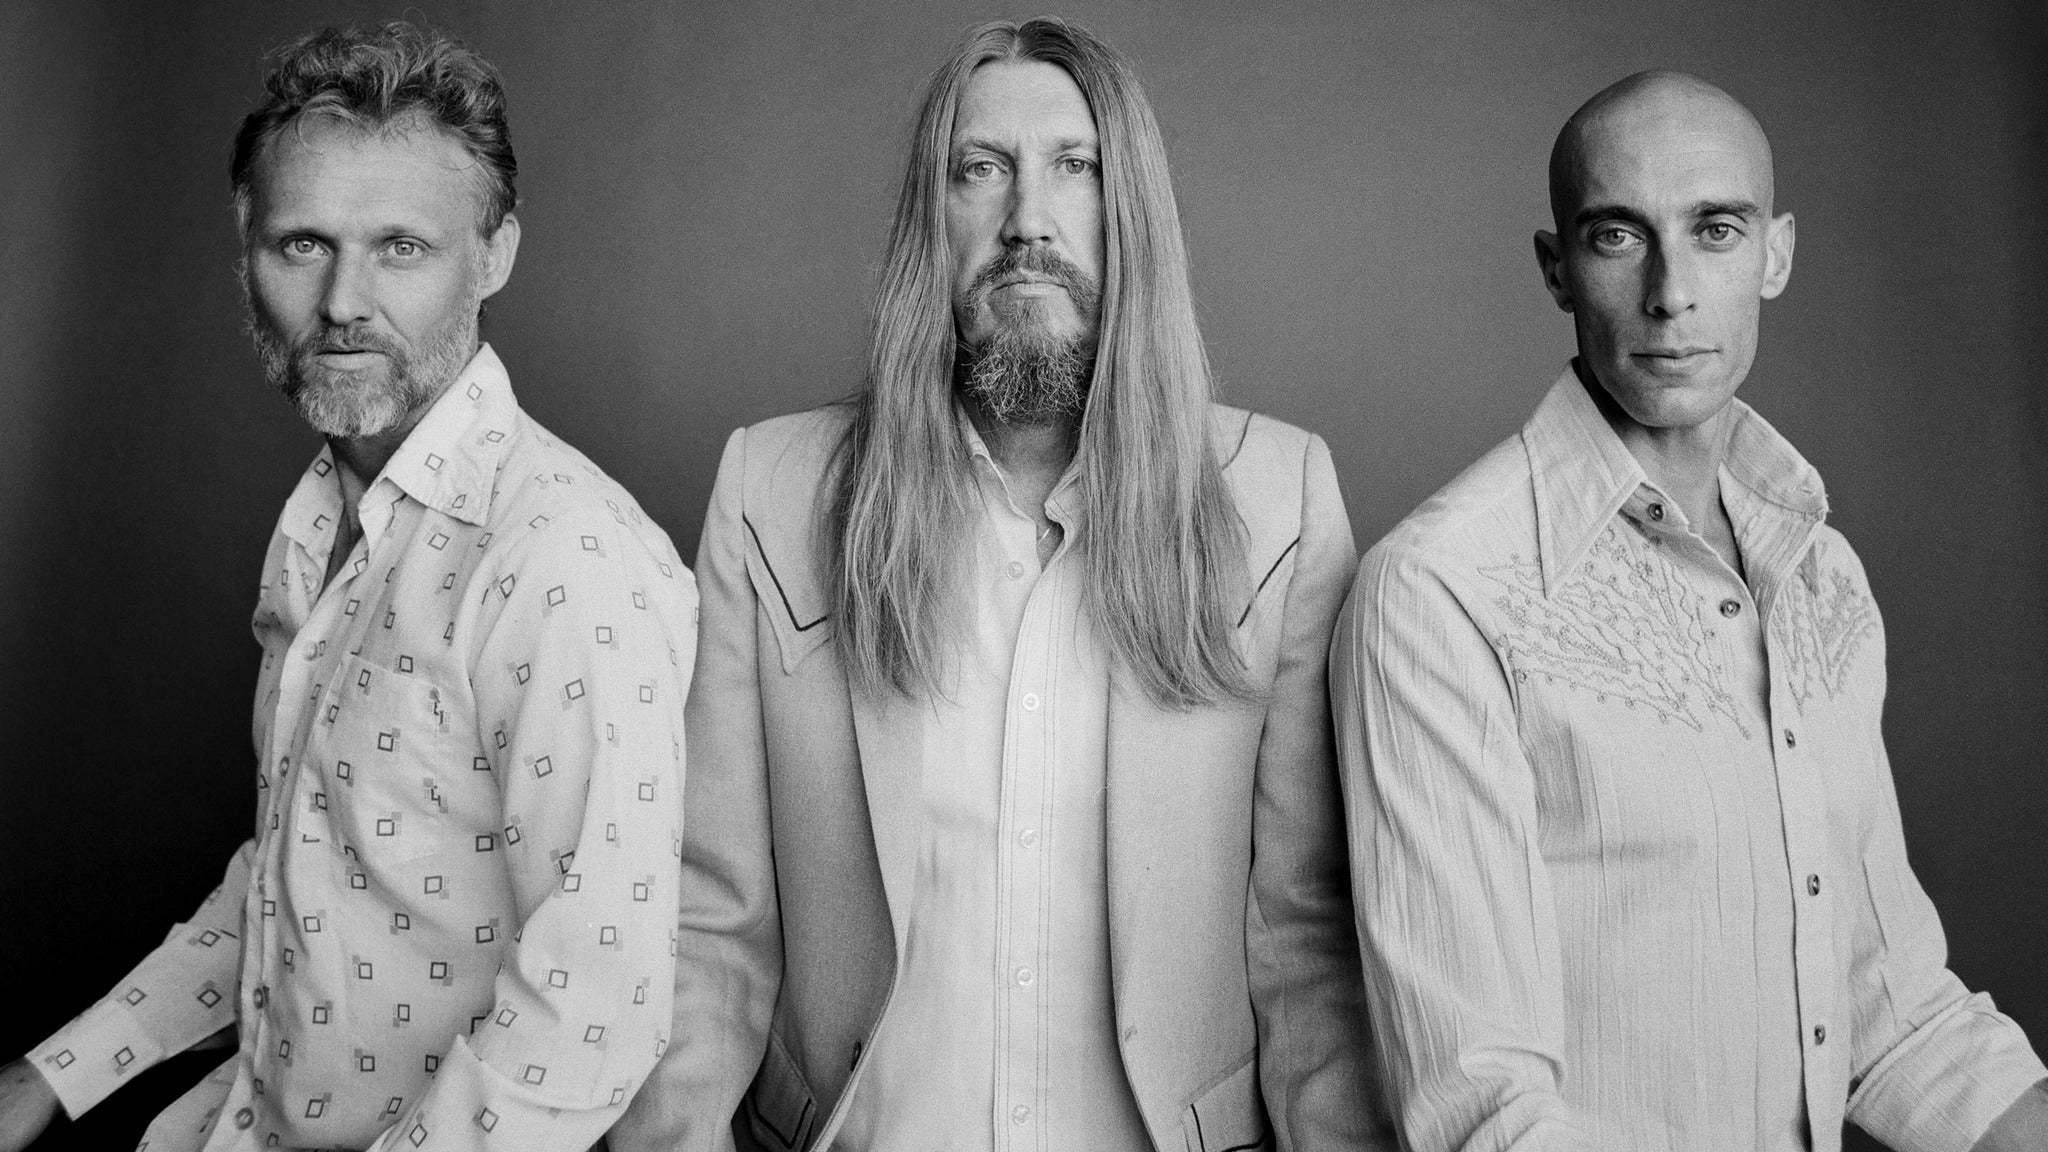 The Wood Brothers pre-sale password